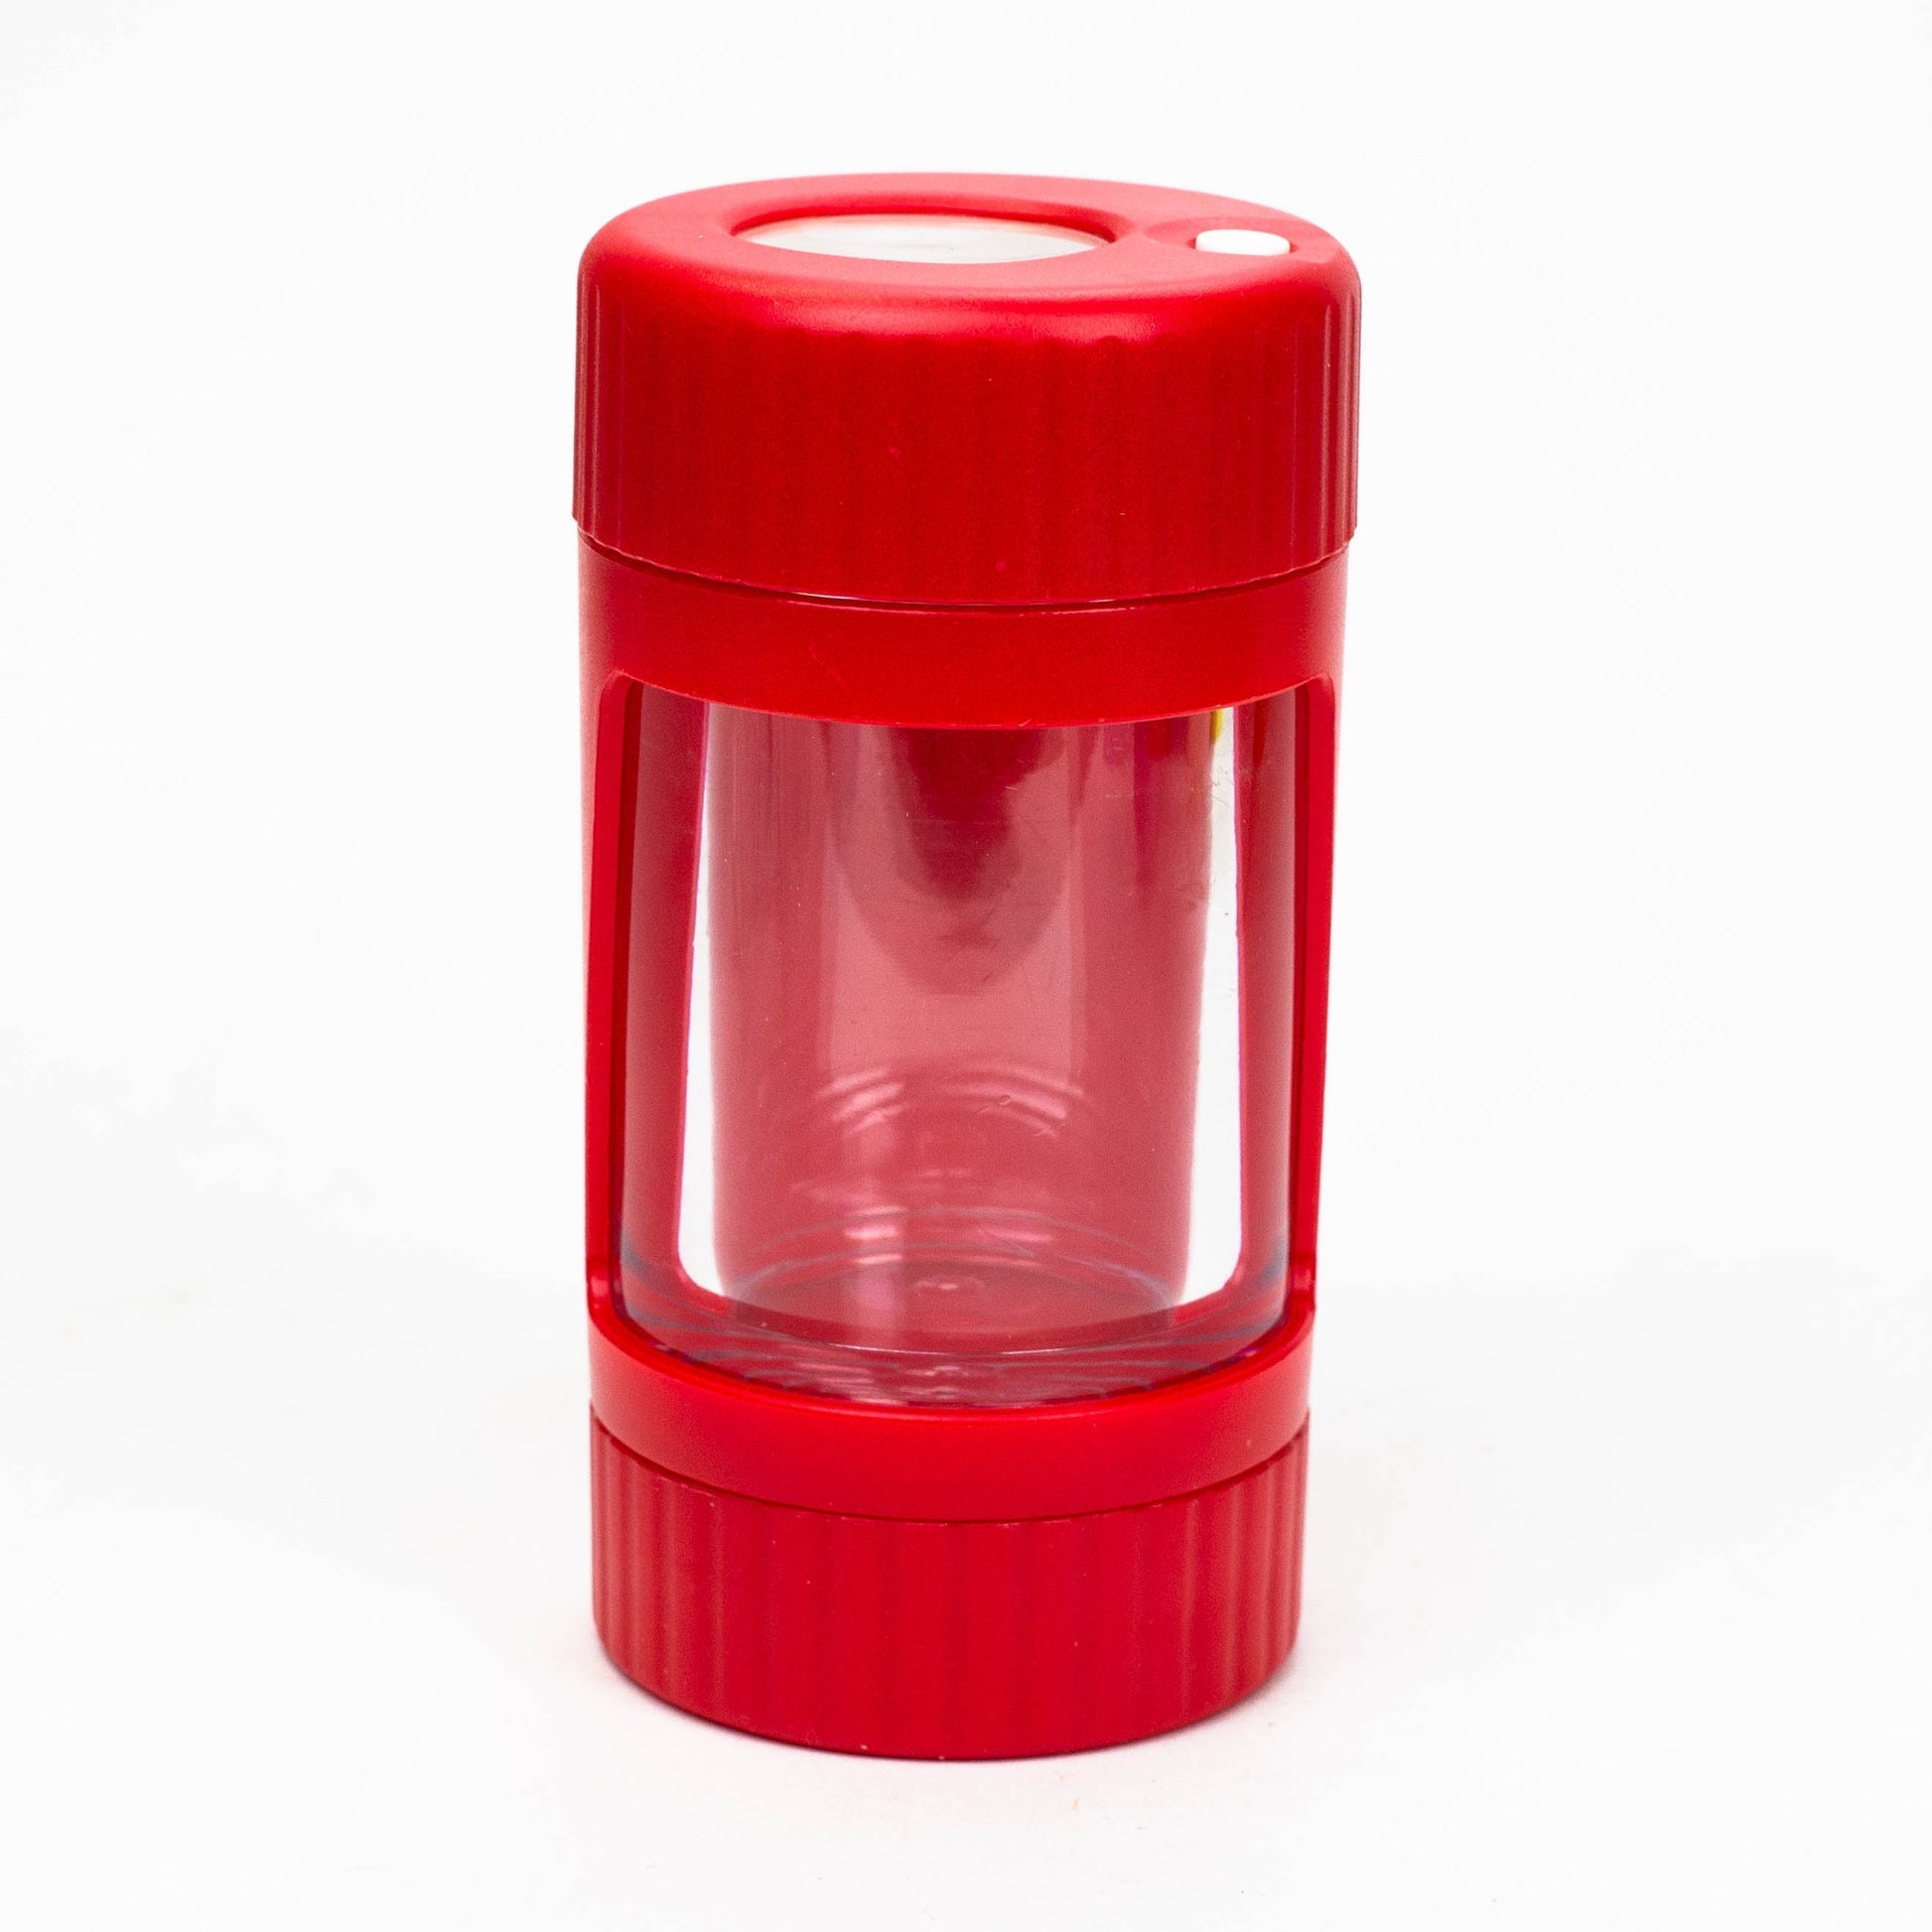 4-in-1 Magnify Led Jar with a grinder and one hitter Smoke Drop Red 